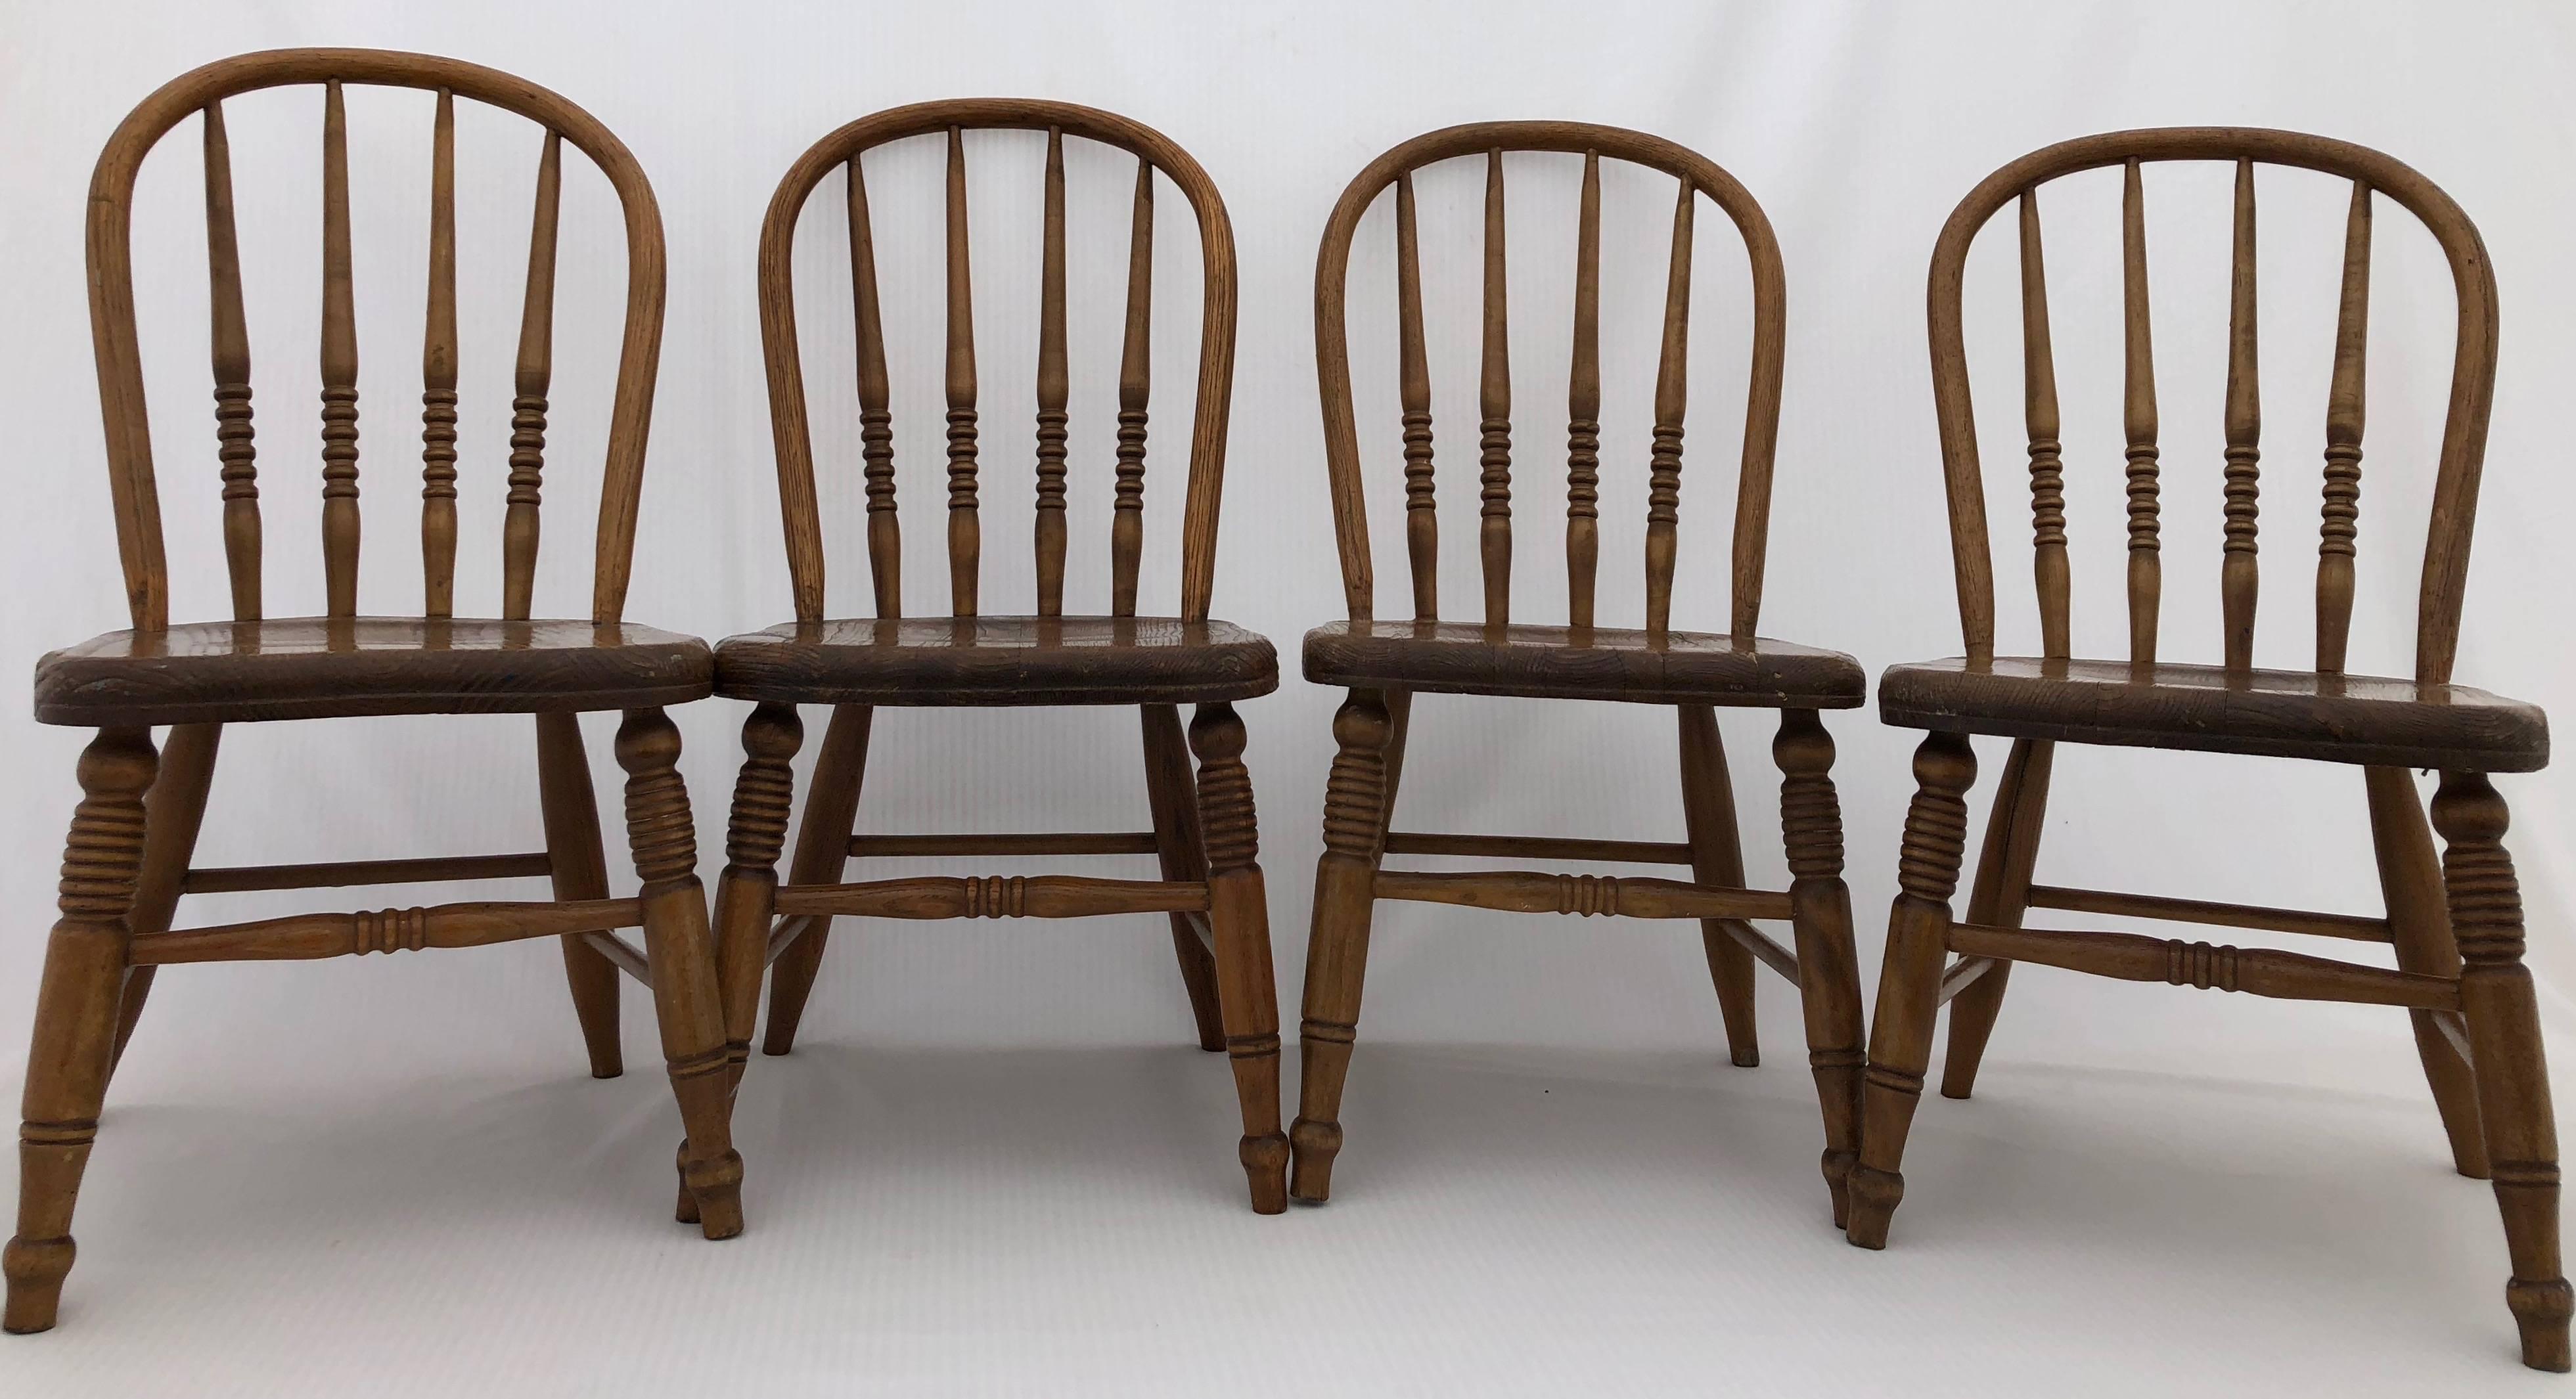 This set of four wooden children's chairs are lovely. They are solid and have spindle, rounded backrests. They are beautiful seats in a great patina and could be used for children to use or as a decorative element.